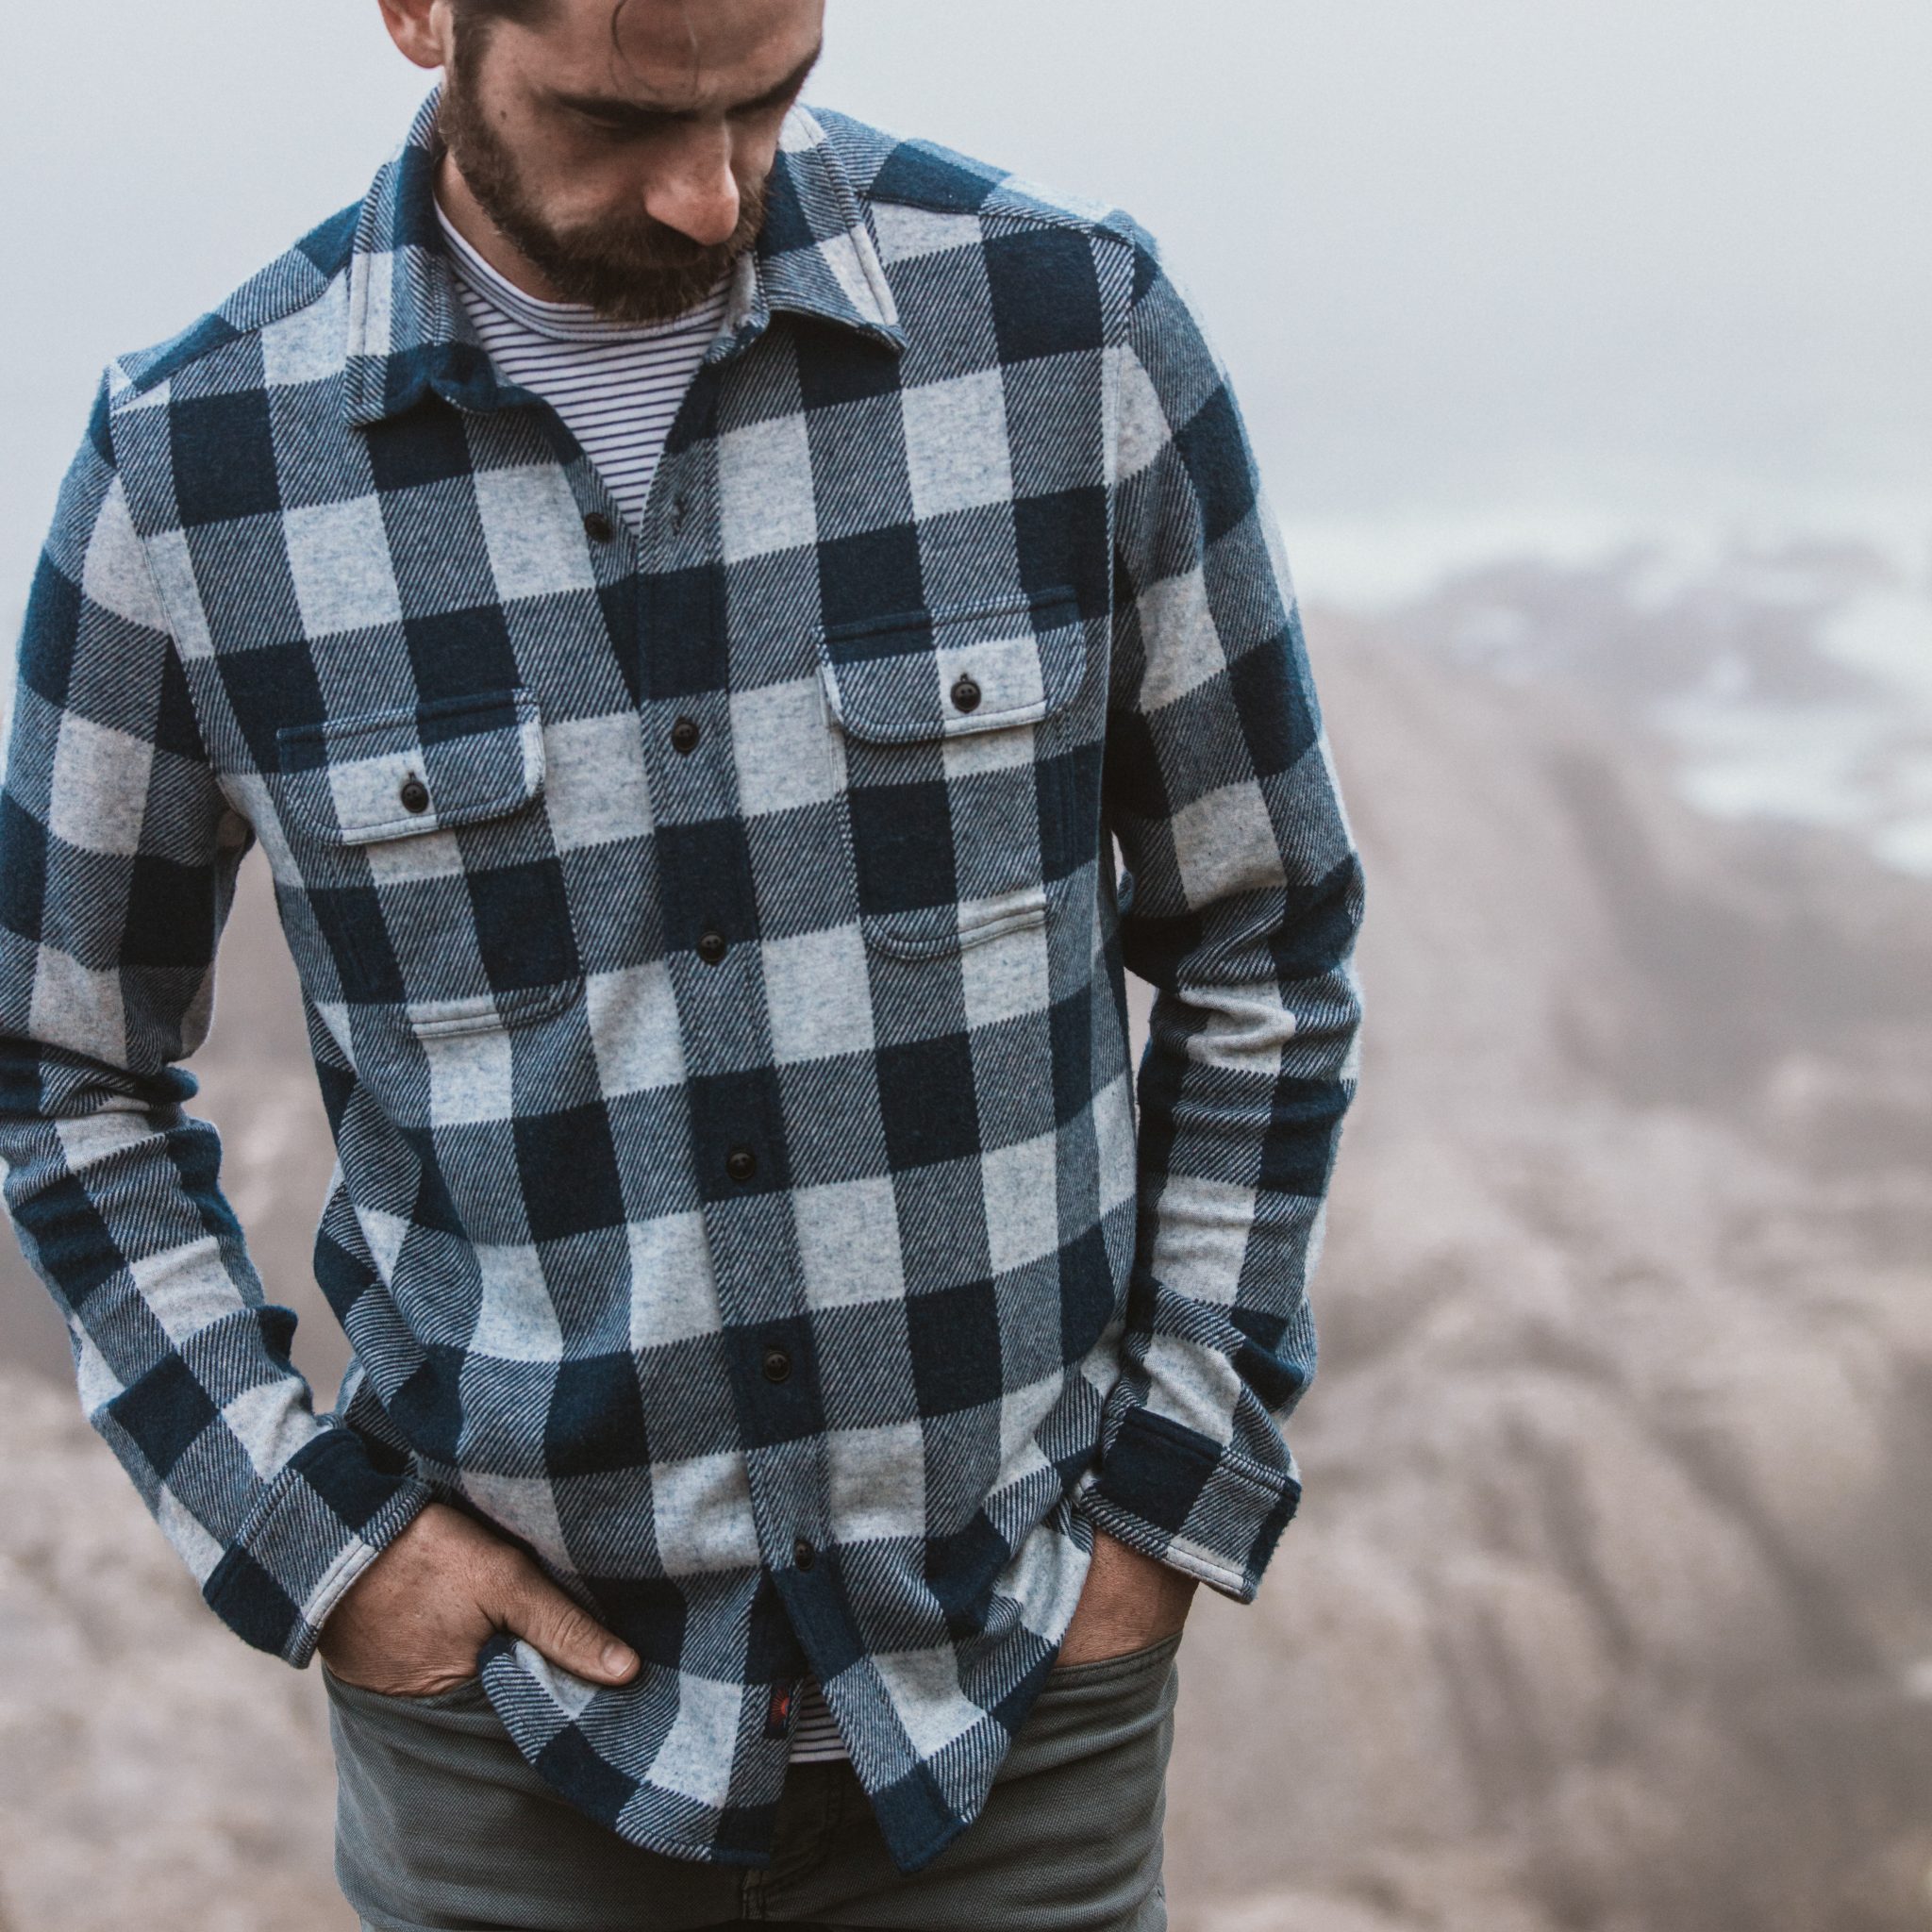 8 of the best men’s flannel shirts for winter | The Coolector